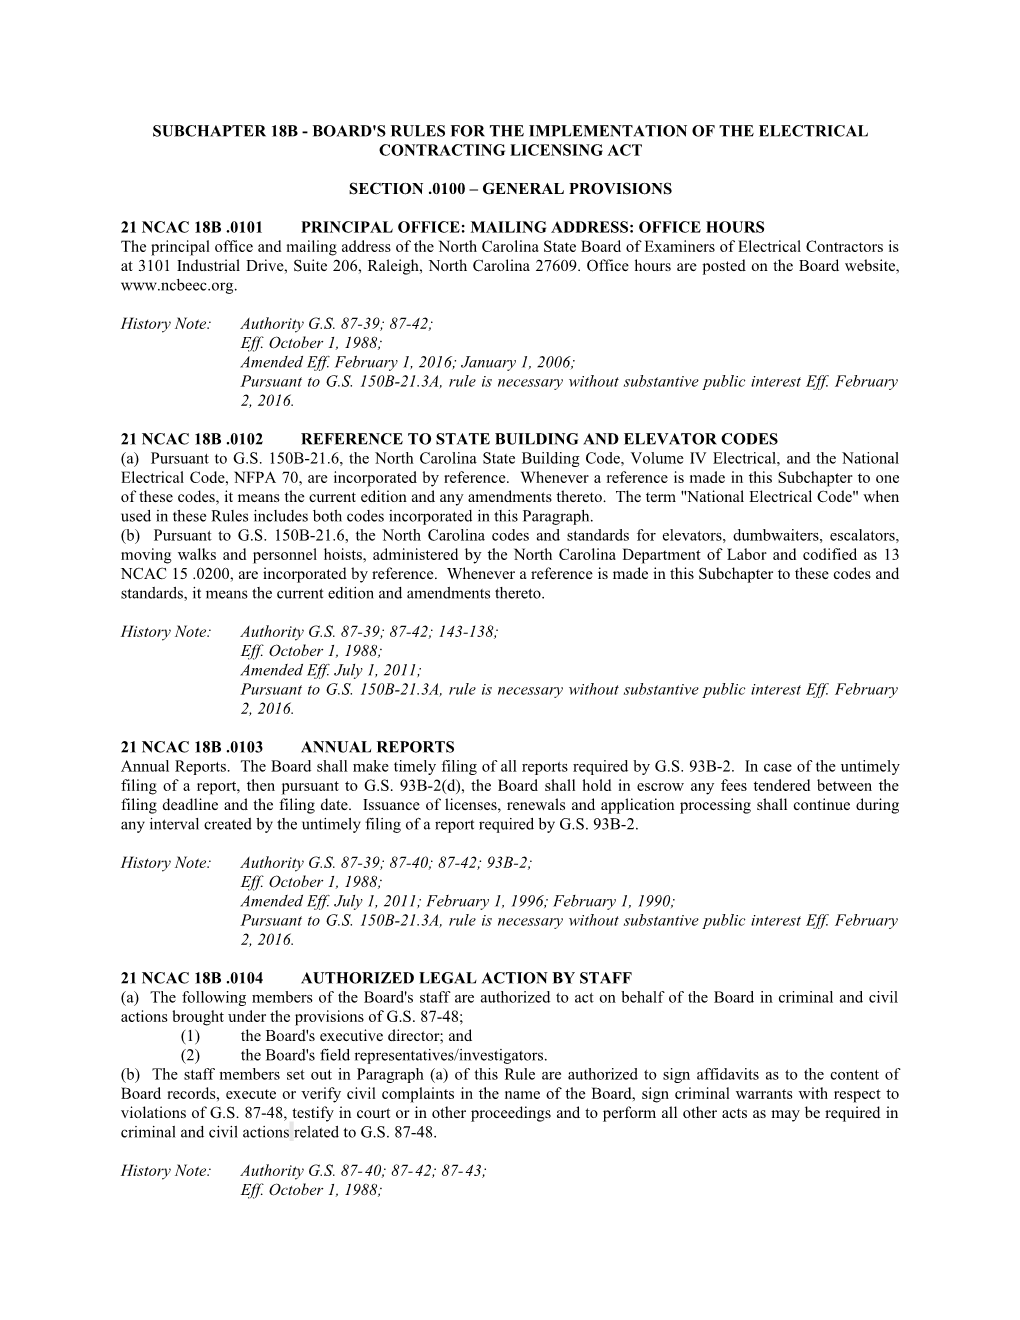 Subchapter 18B - BOARD's RULES for the IMPLEMENTATION of the ELECTRICAL